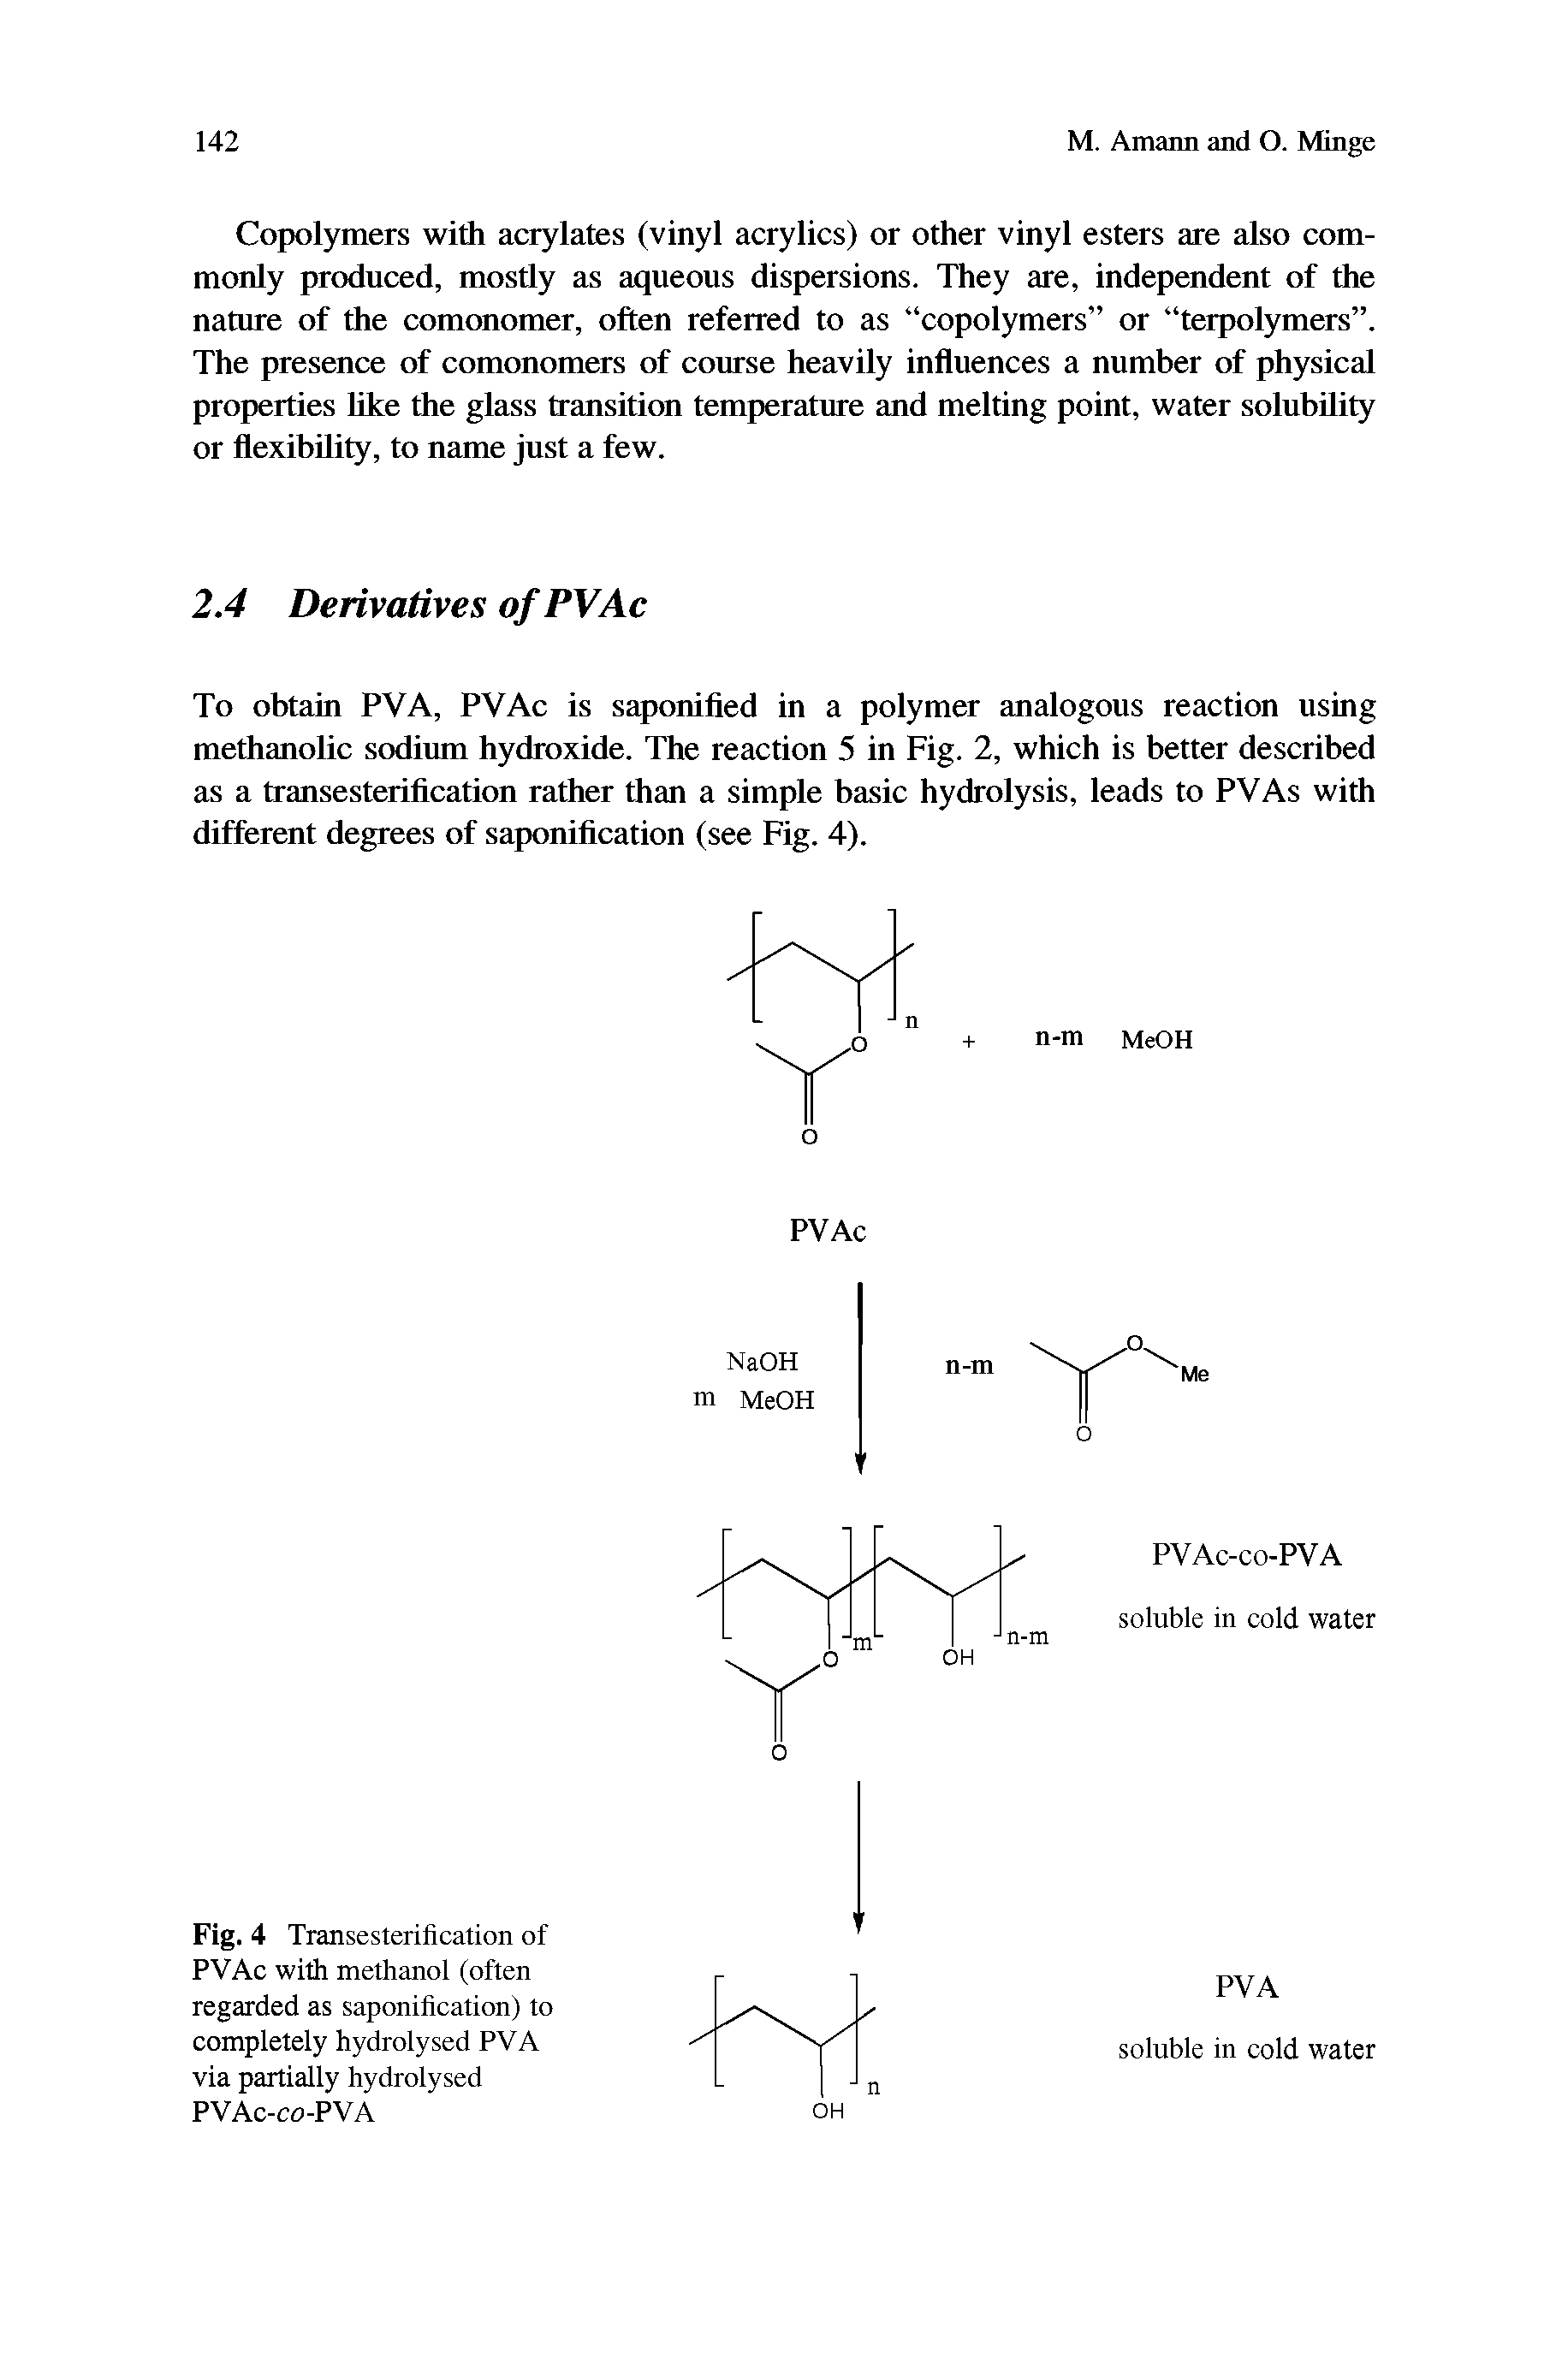 Fig. 4 Transesterification of PVAc with methanol (often regarded as saponification) to completely hydrolysed PVA via partially hydrolysed PVAc-co-PVA...